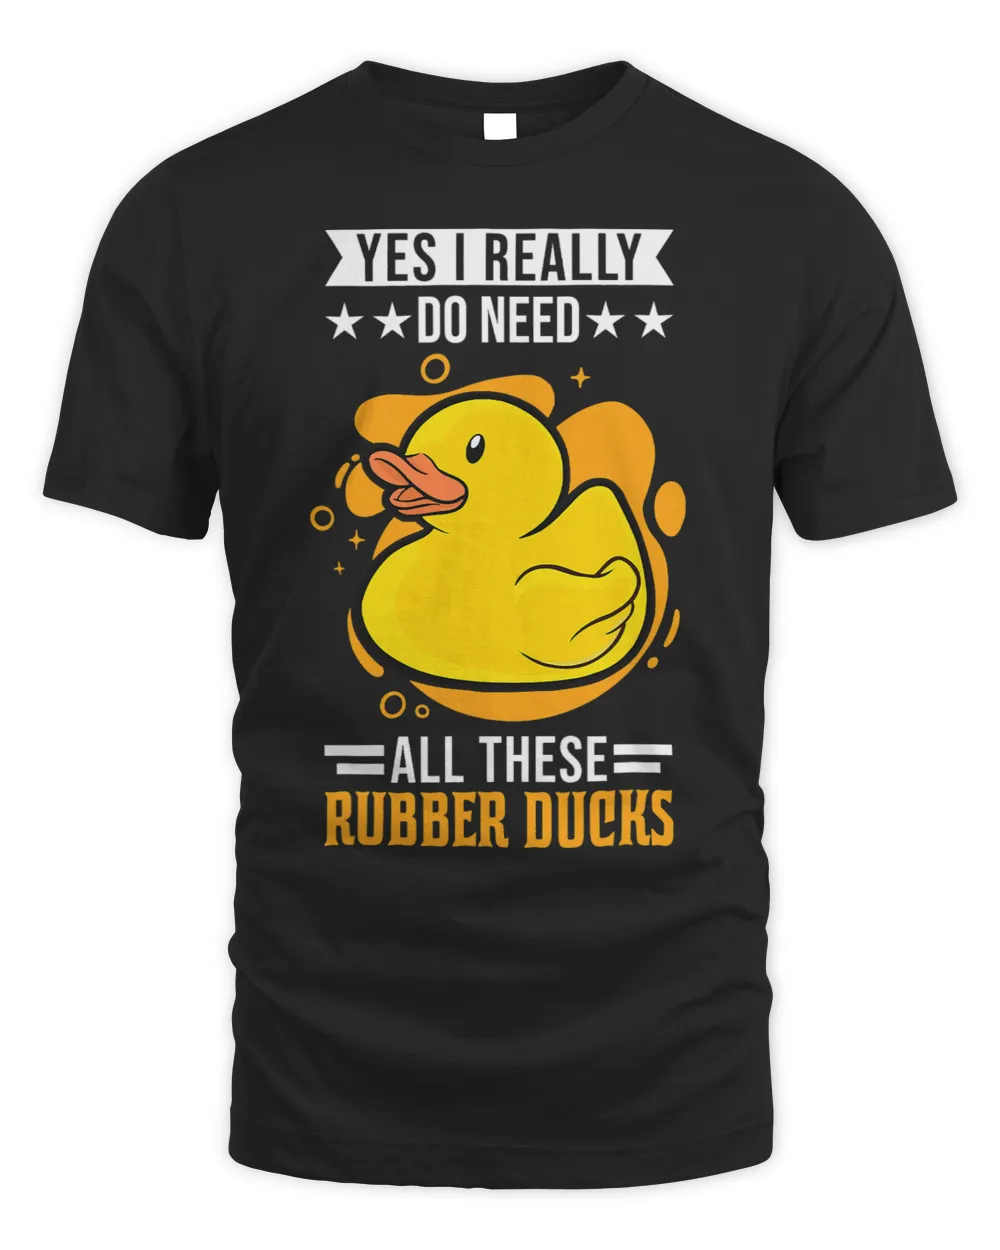 Yes I really do need all these Rubber Ducks